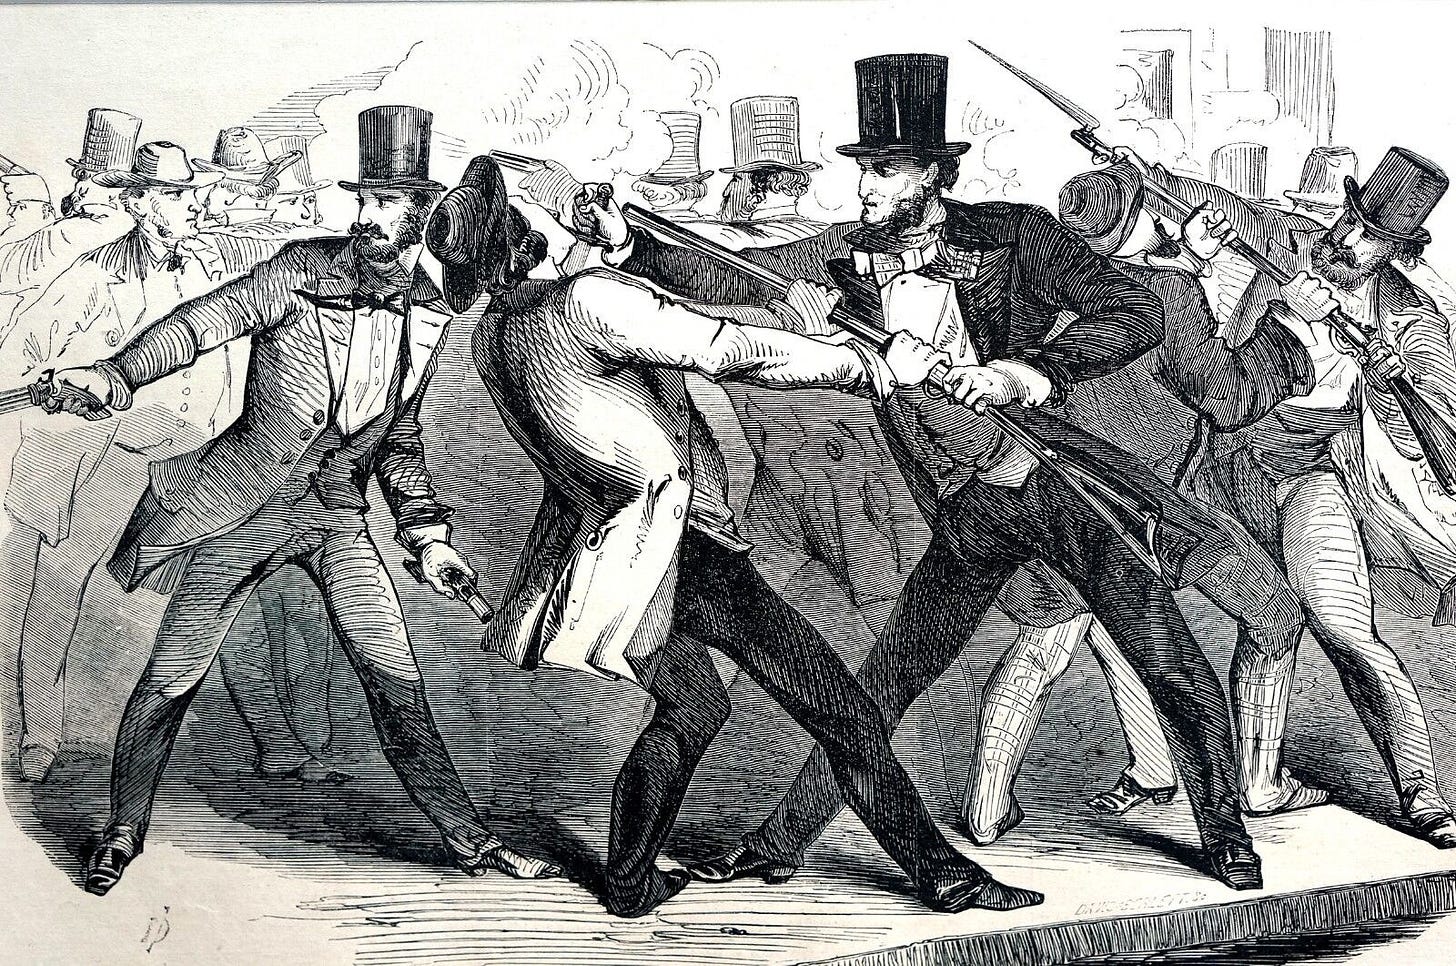 A woodcut illustration of men in top hats fighting. Look up the San Francisco Insurrection of 1856 for a good time.